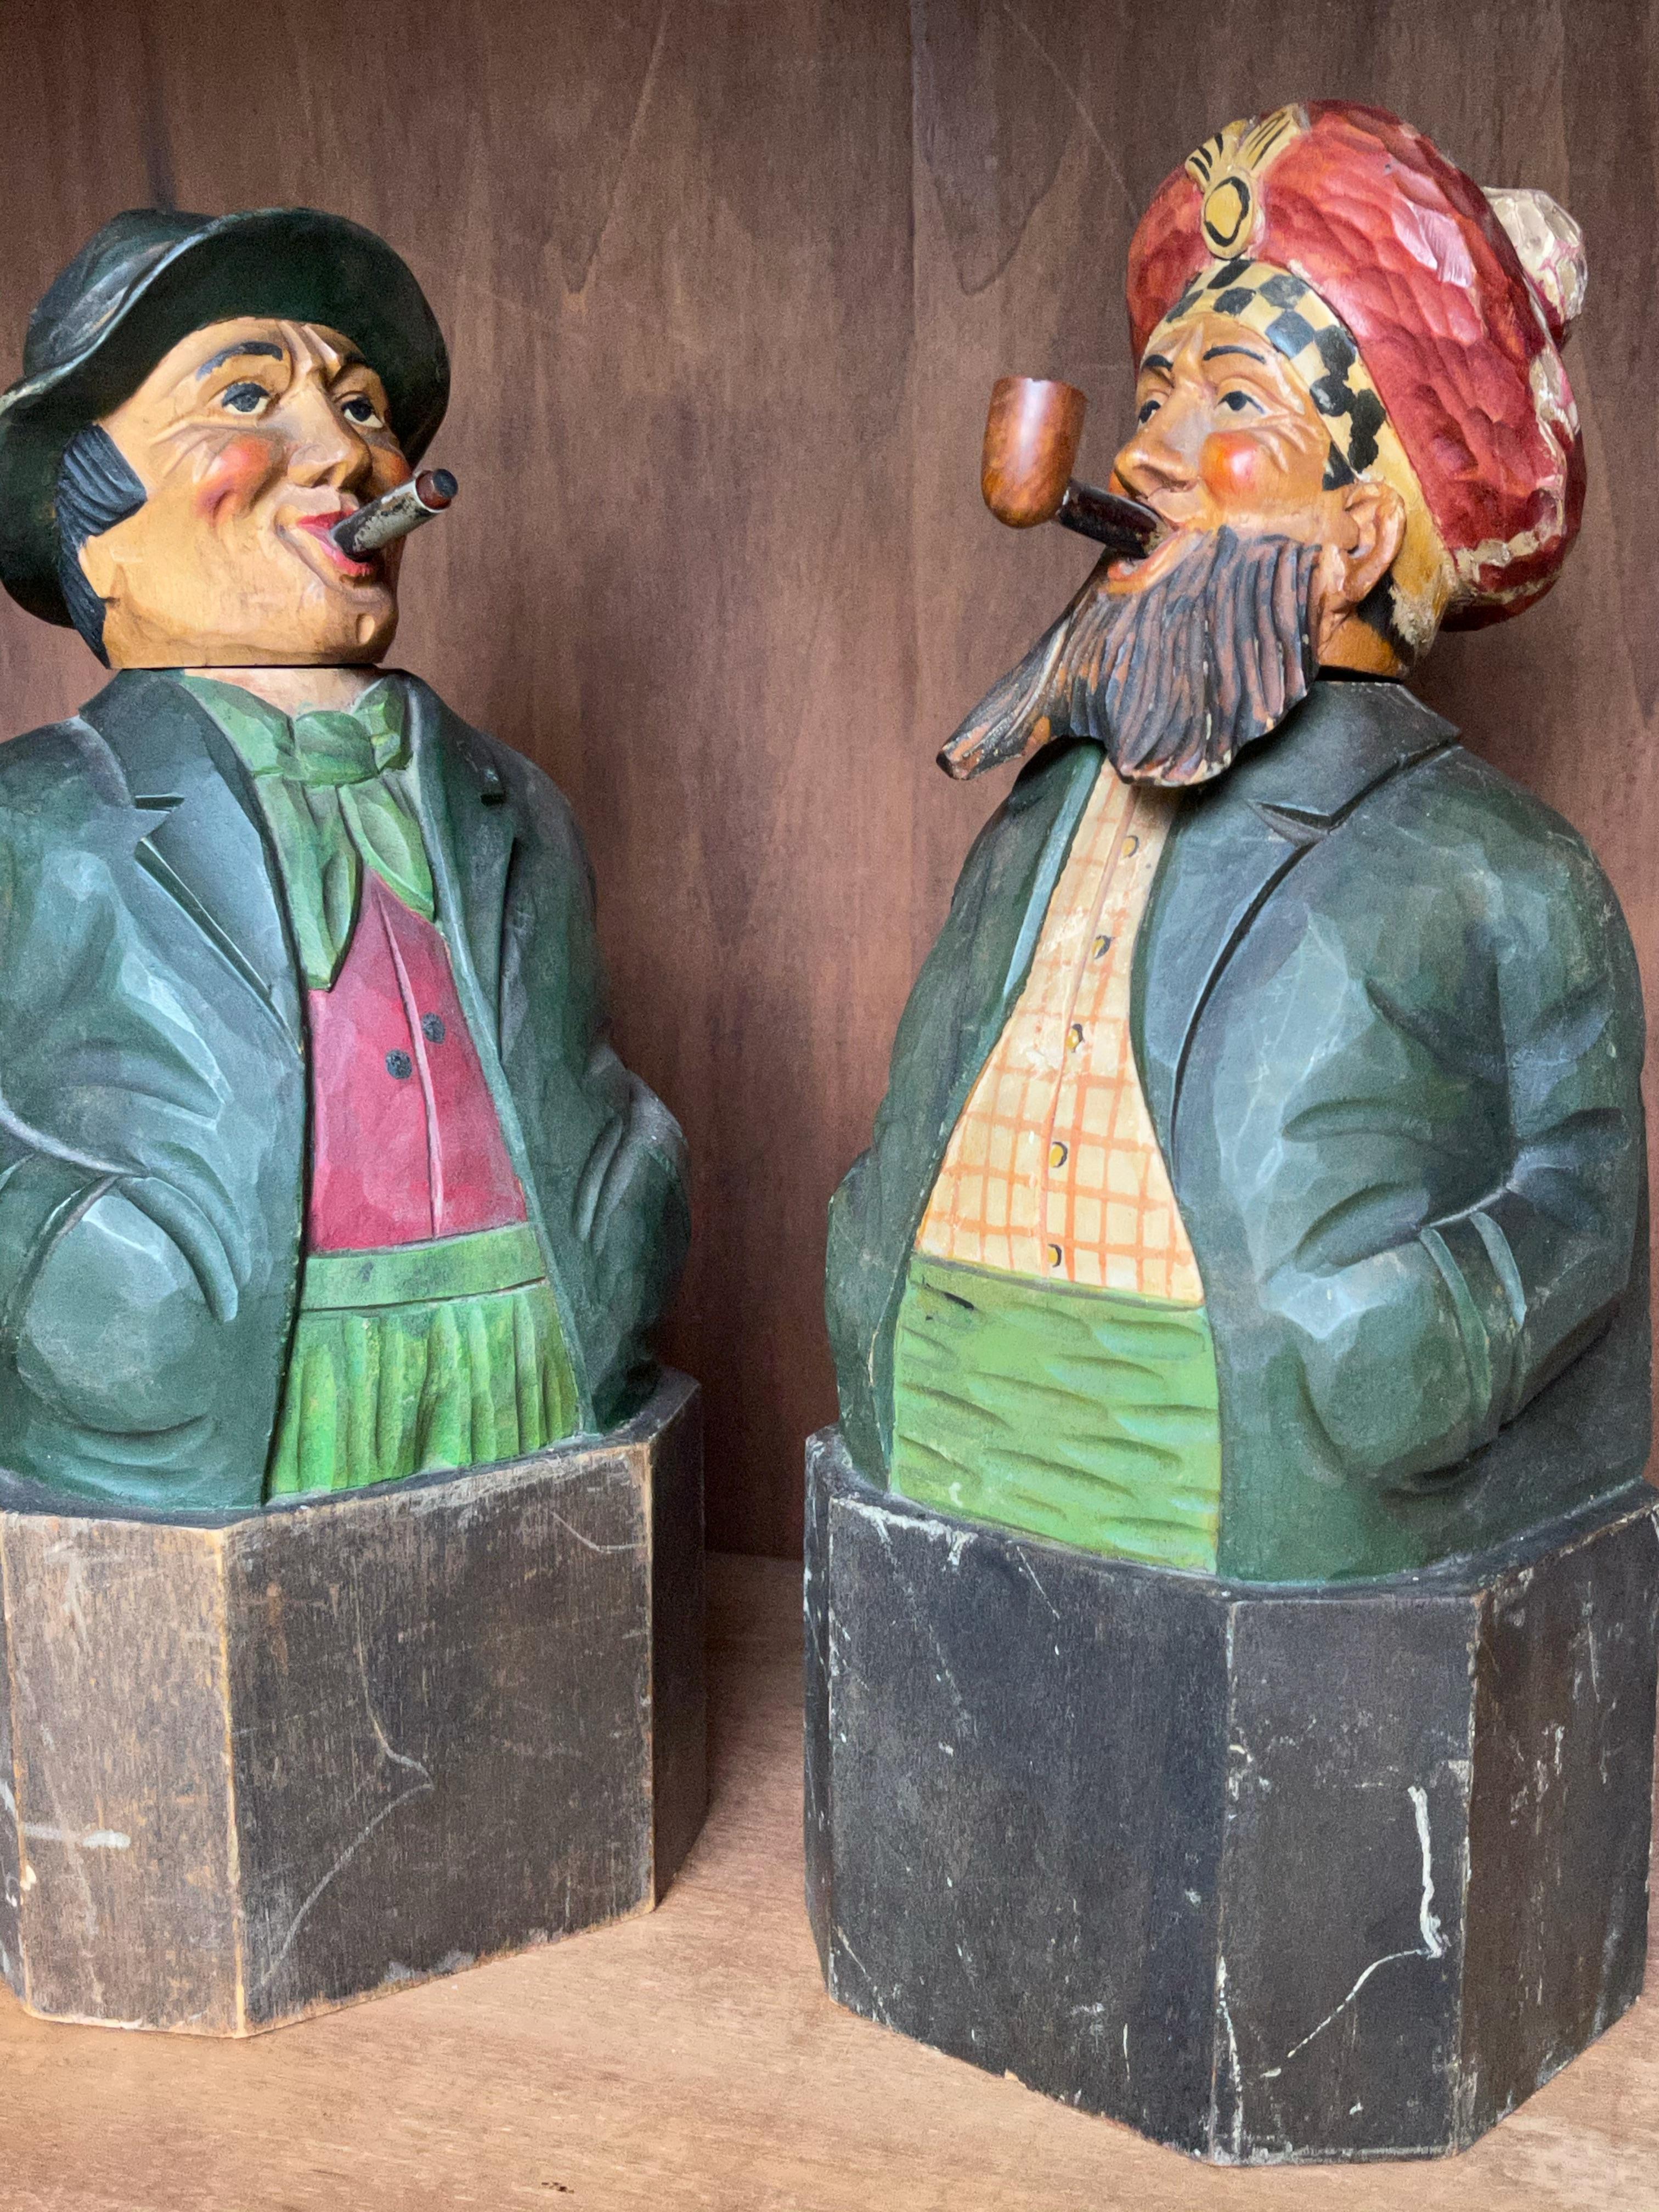 Great novelty items for collectors and lovers of rare barware. 

These rare sculptural decanters from the 1930s make real cool talking pieces. The heads come off and inside these hand-carved, pipe and cigar smoking tiplers there is a glass bottle.